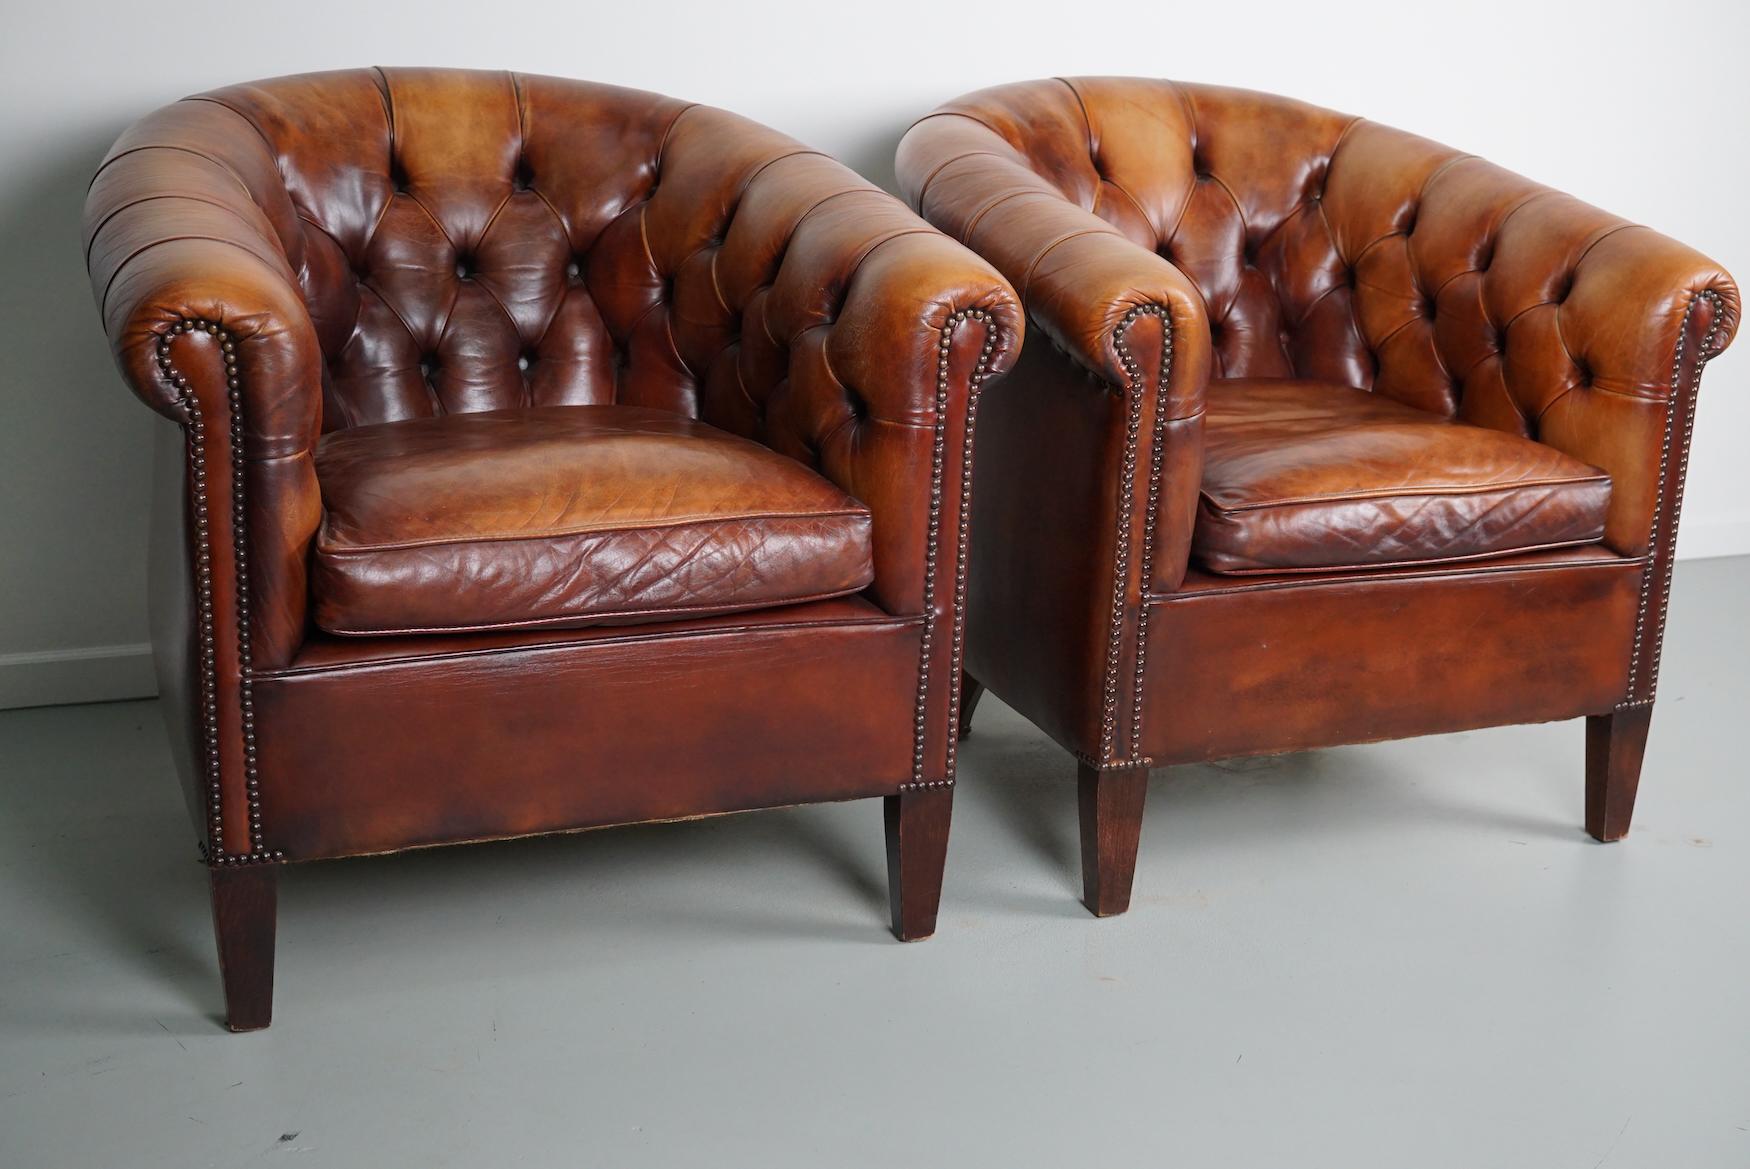 Vintage Dutch Chesterfield Cognac Leather Club Chairs, Set of 2 5